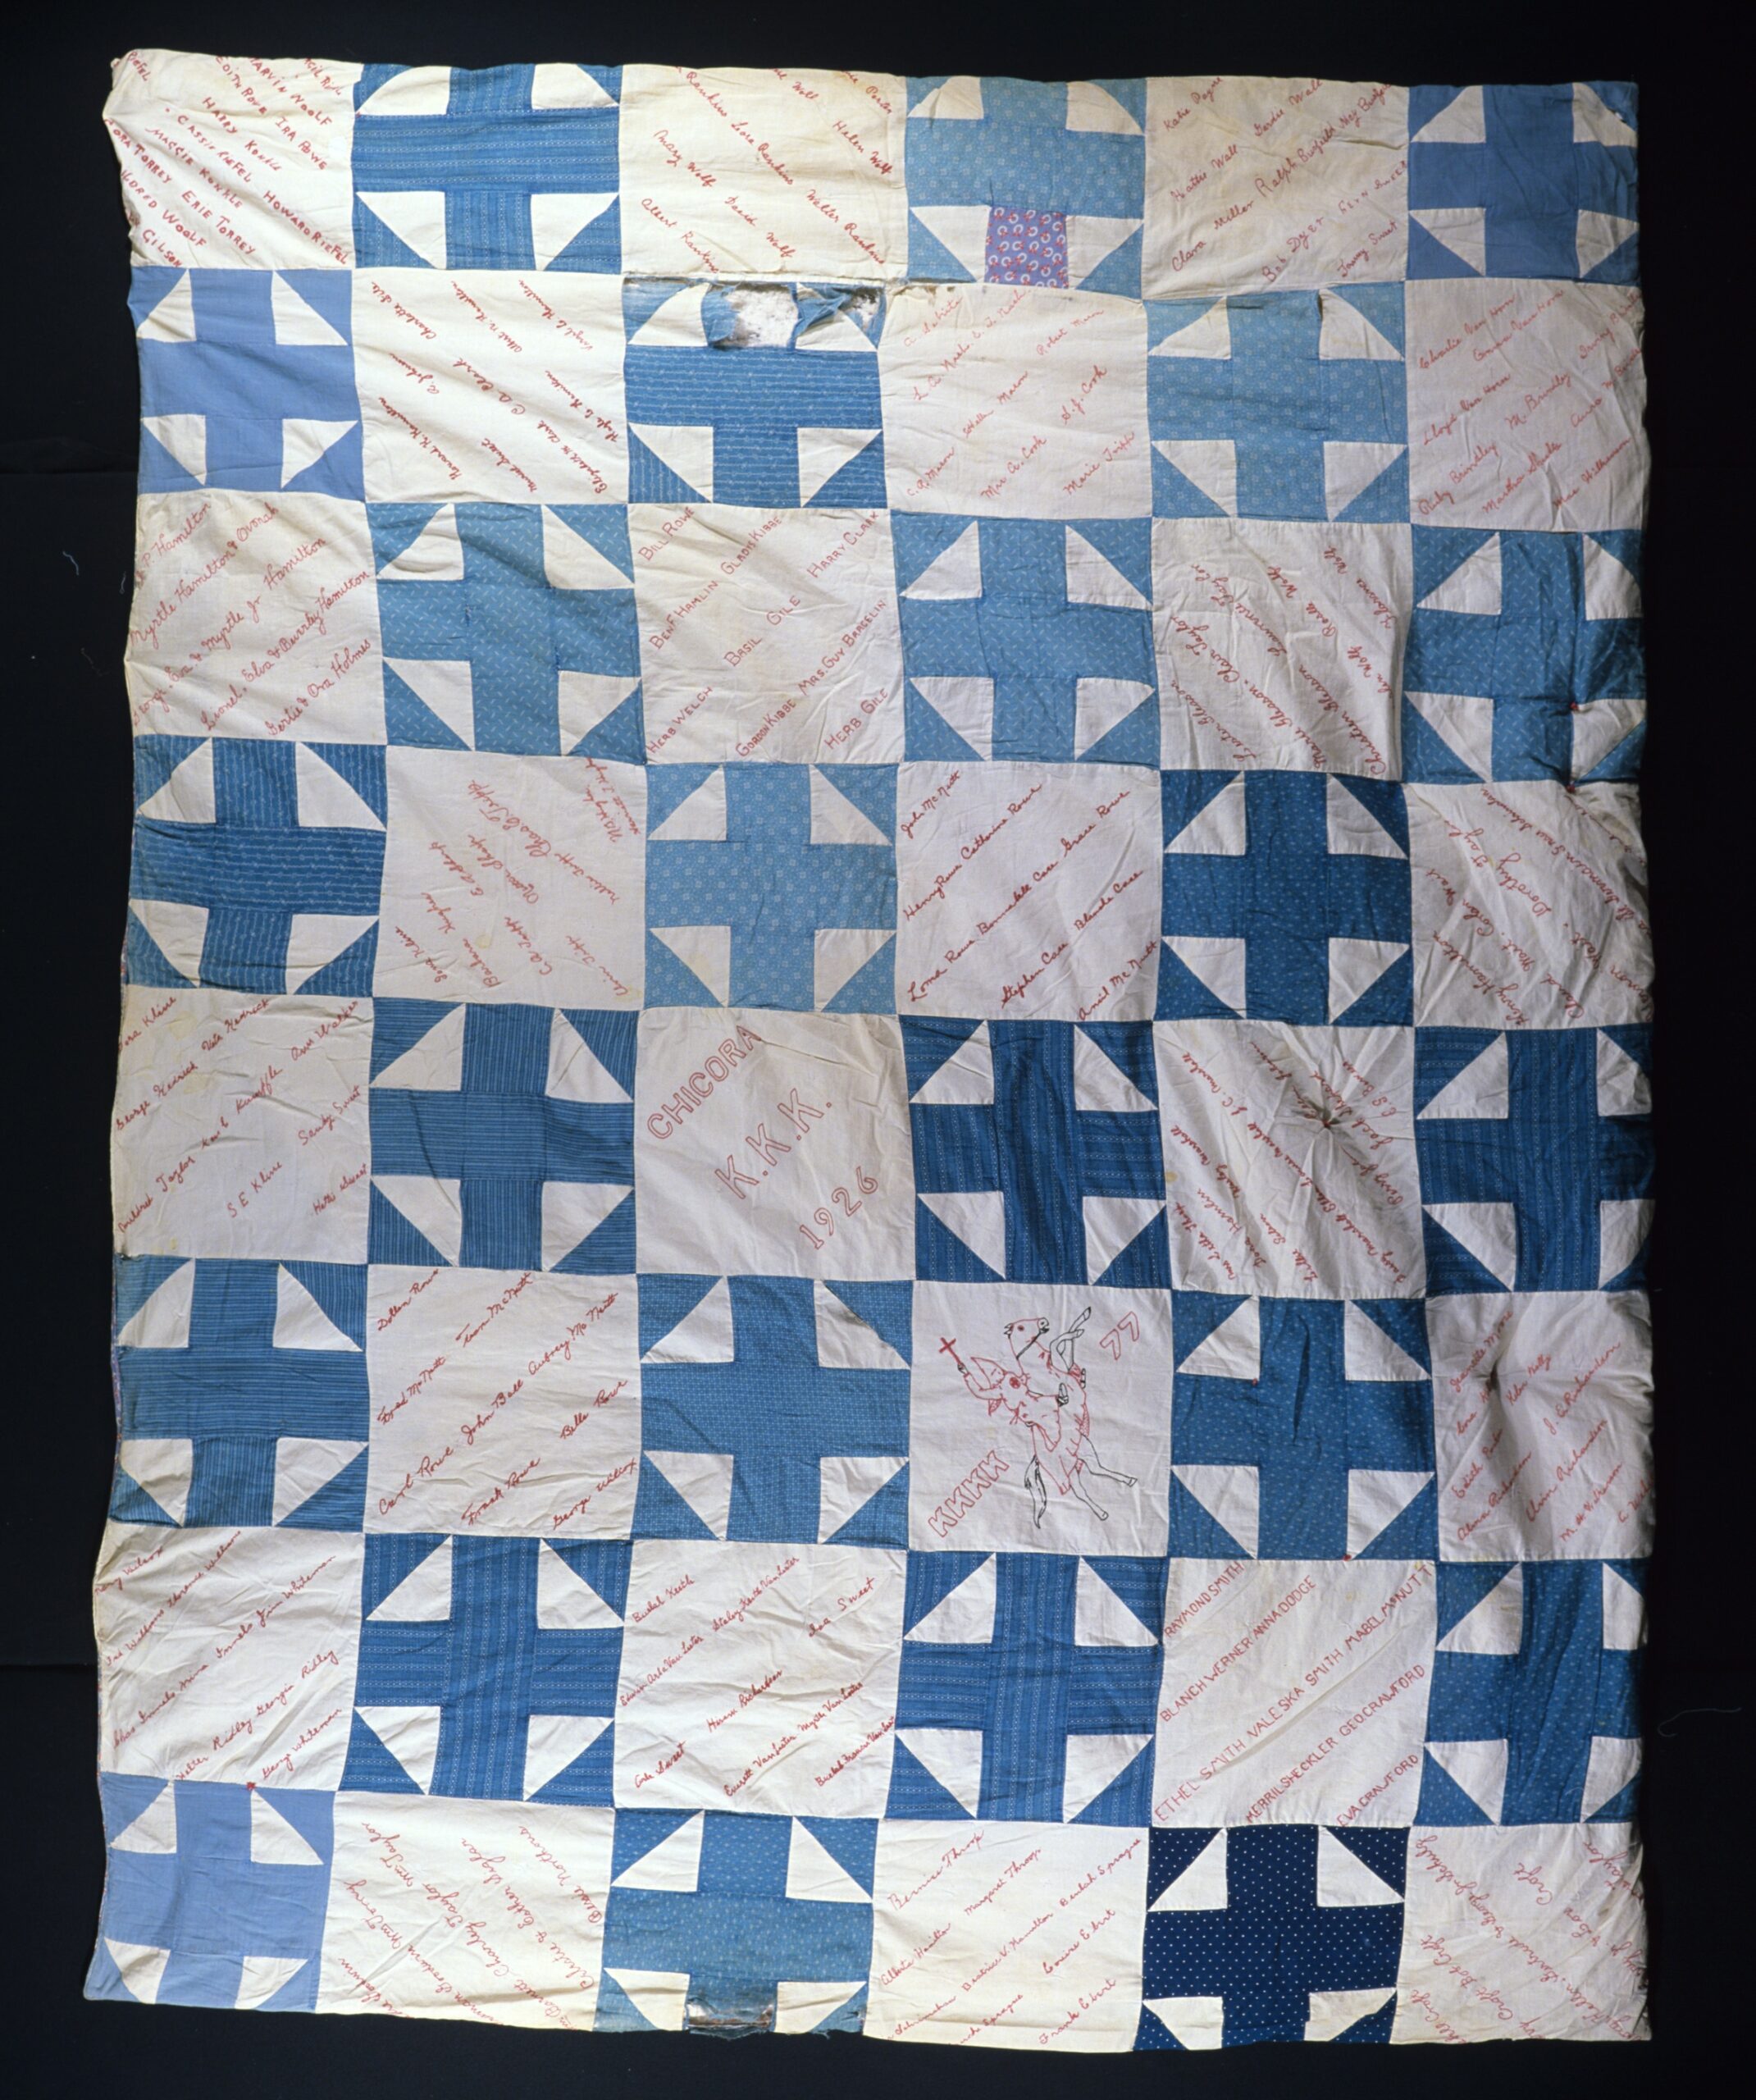 quilt with alternating squares of blue crosses and white squares embroidered with names in black and red